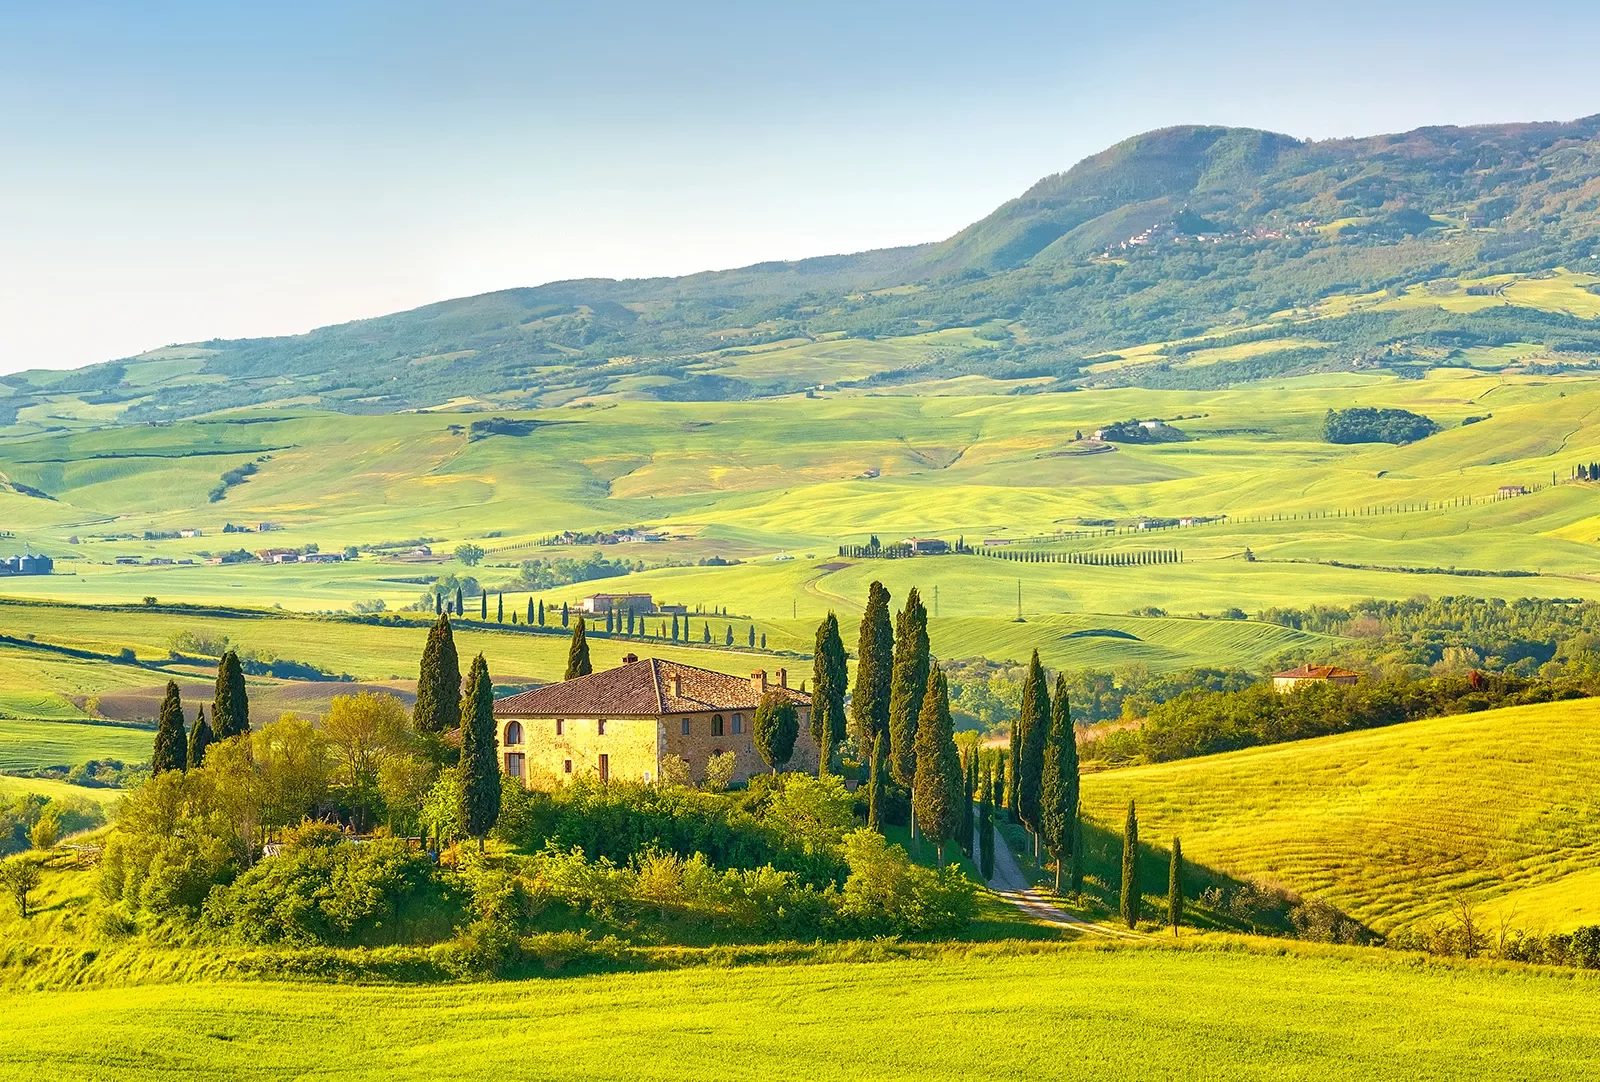 Wide shot of Tuscan countryside.